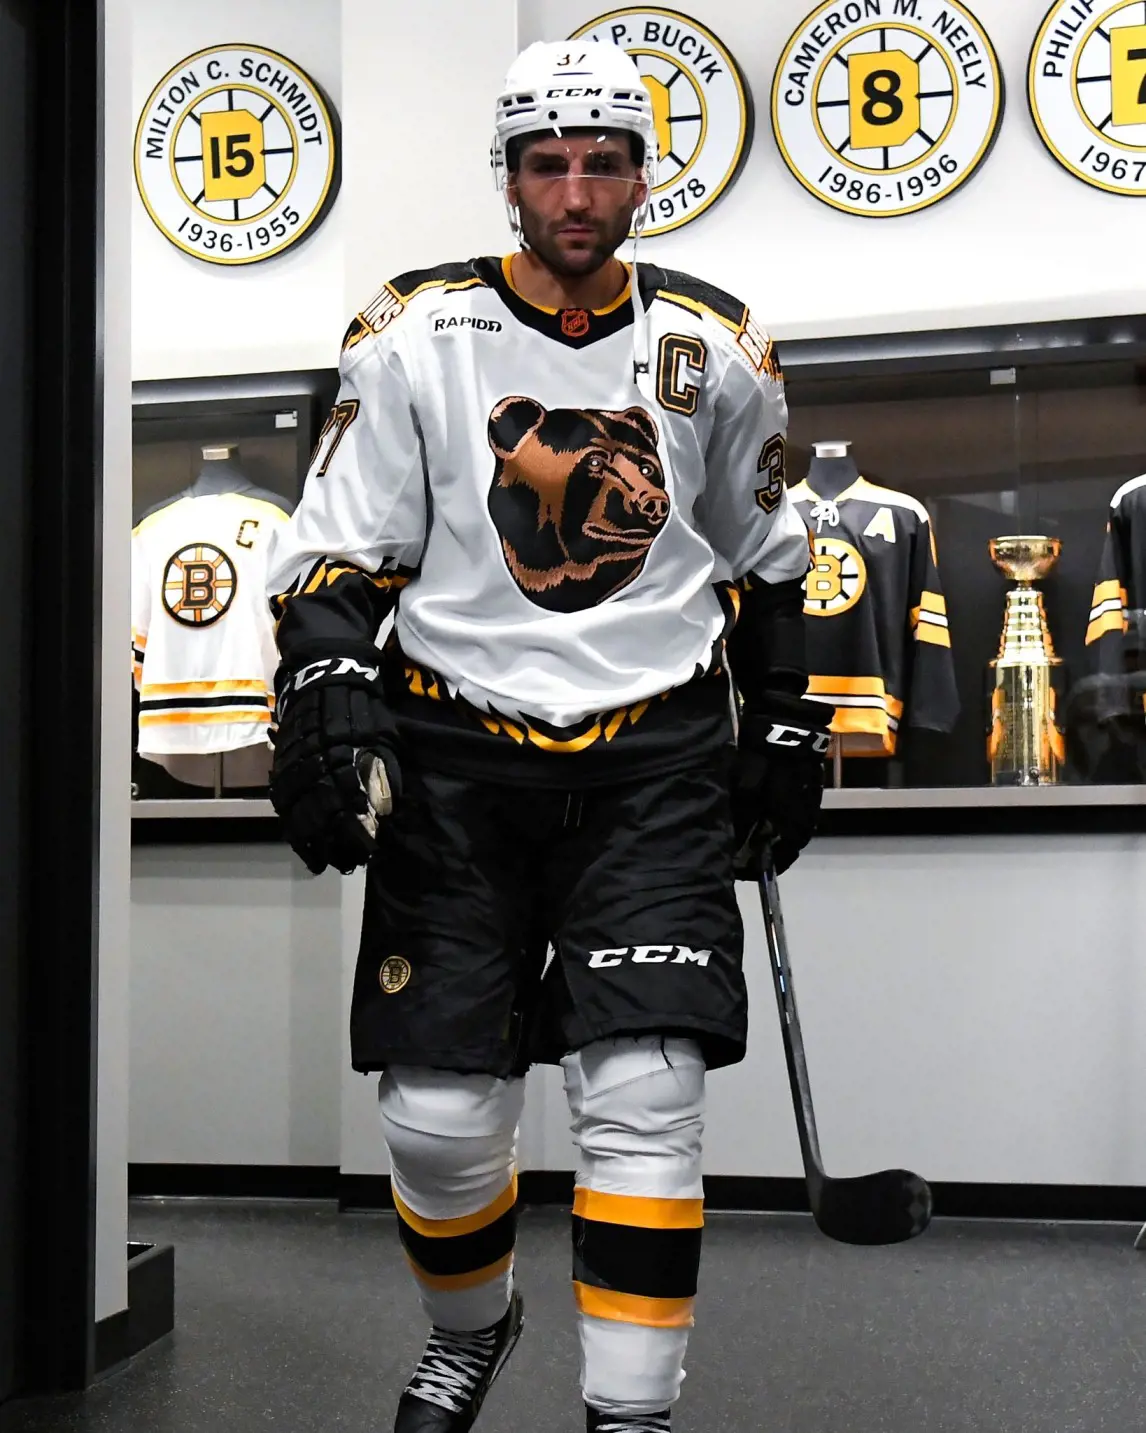 Patrice Bergeron wearing the Bruins mid 90s gold  jersey and carrying a hockey stick